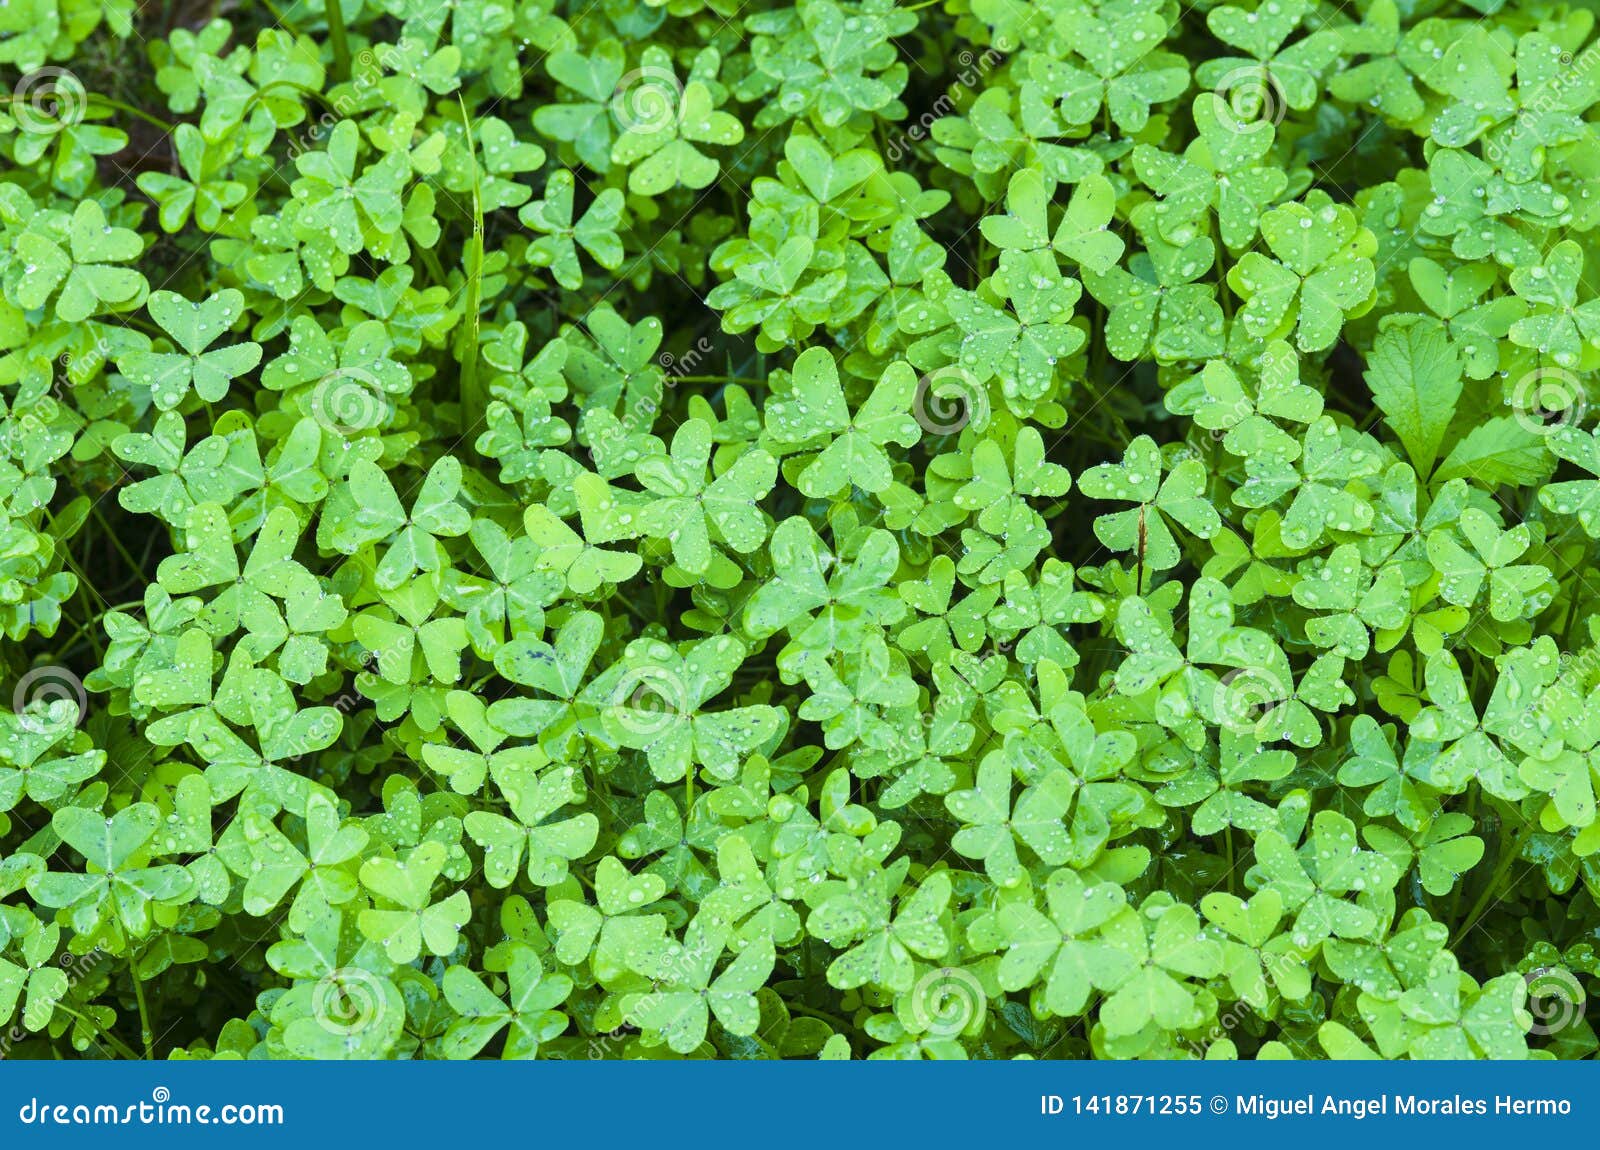 top view of a floor full of clovers wet by dew